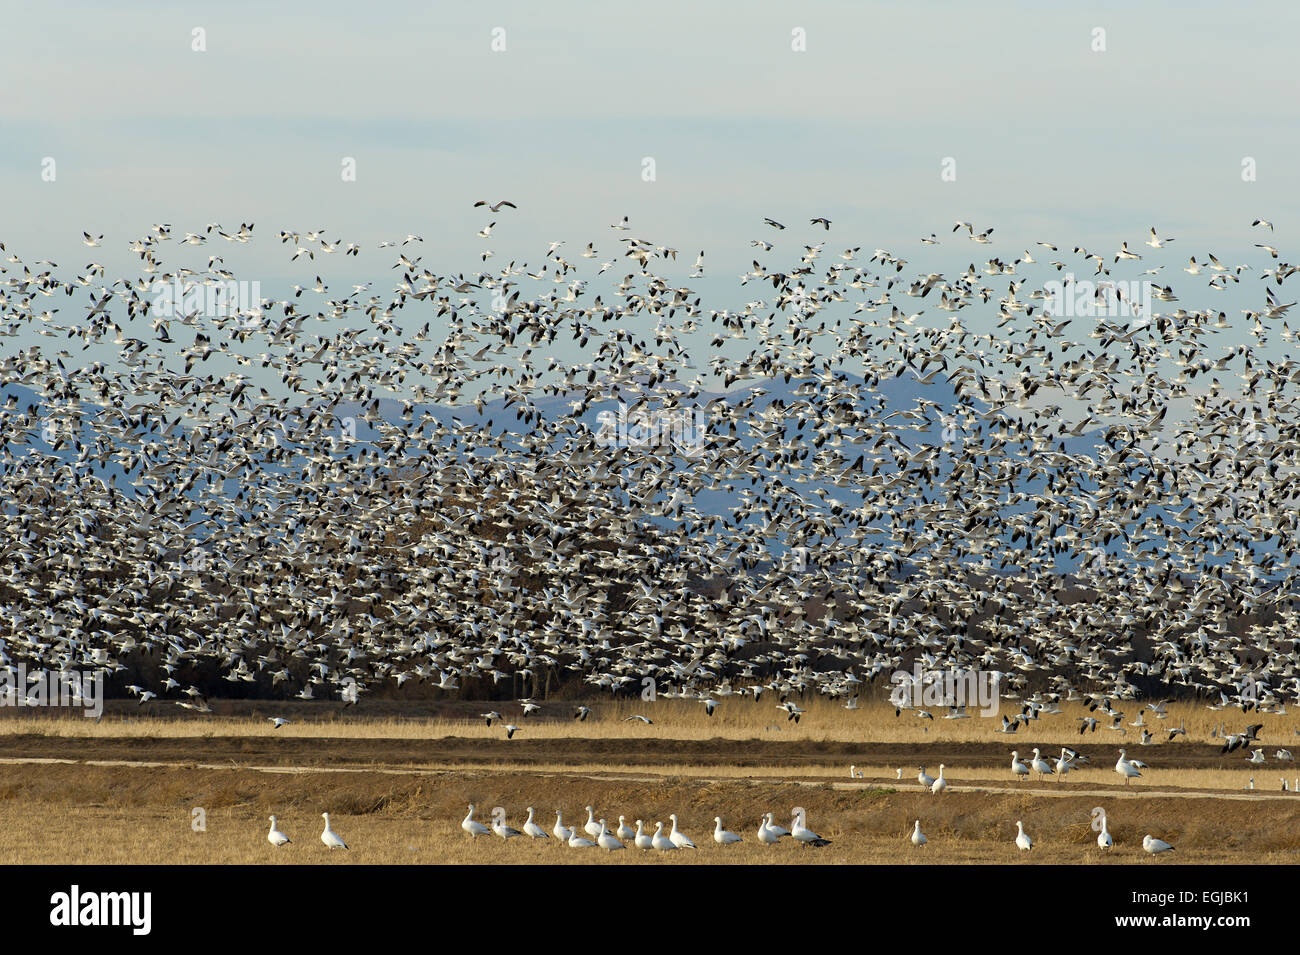 A flock of snow geese in the sky of Bosque Del Apache in New Mexico, USA Stock Photo